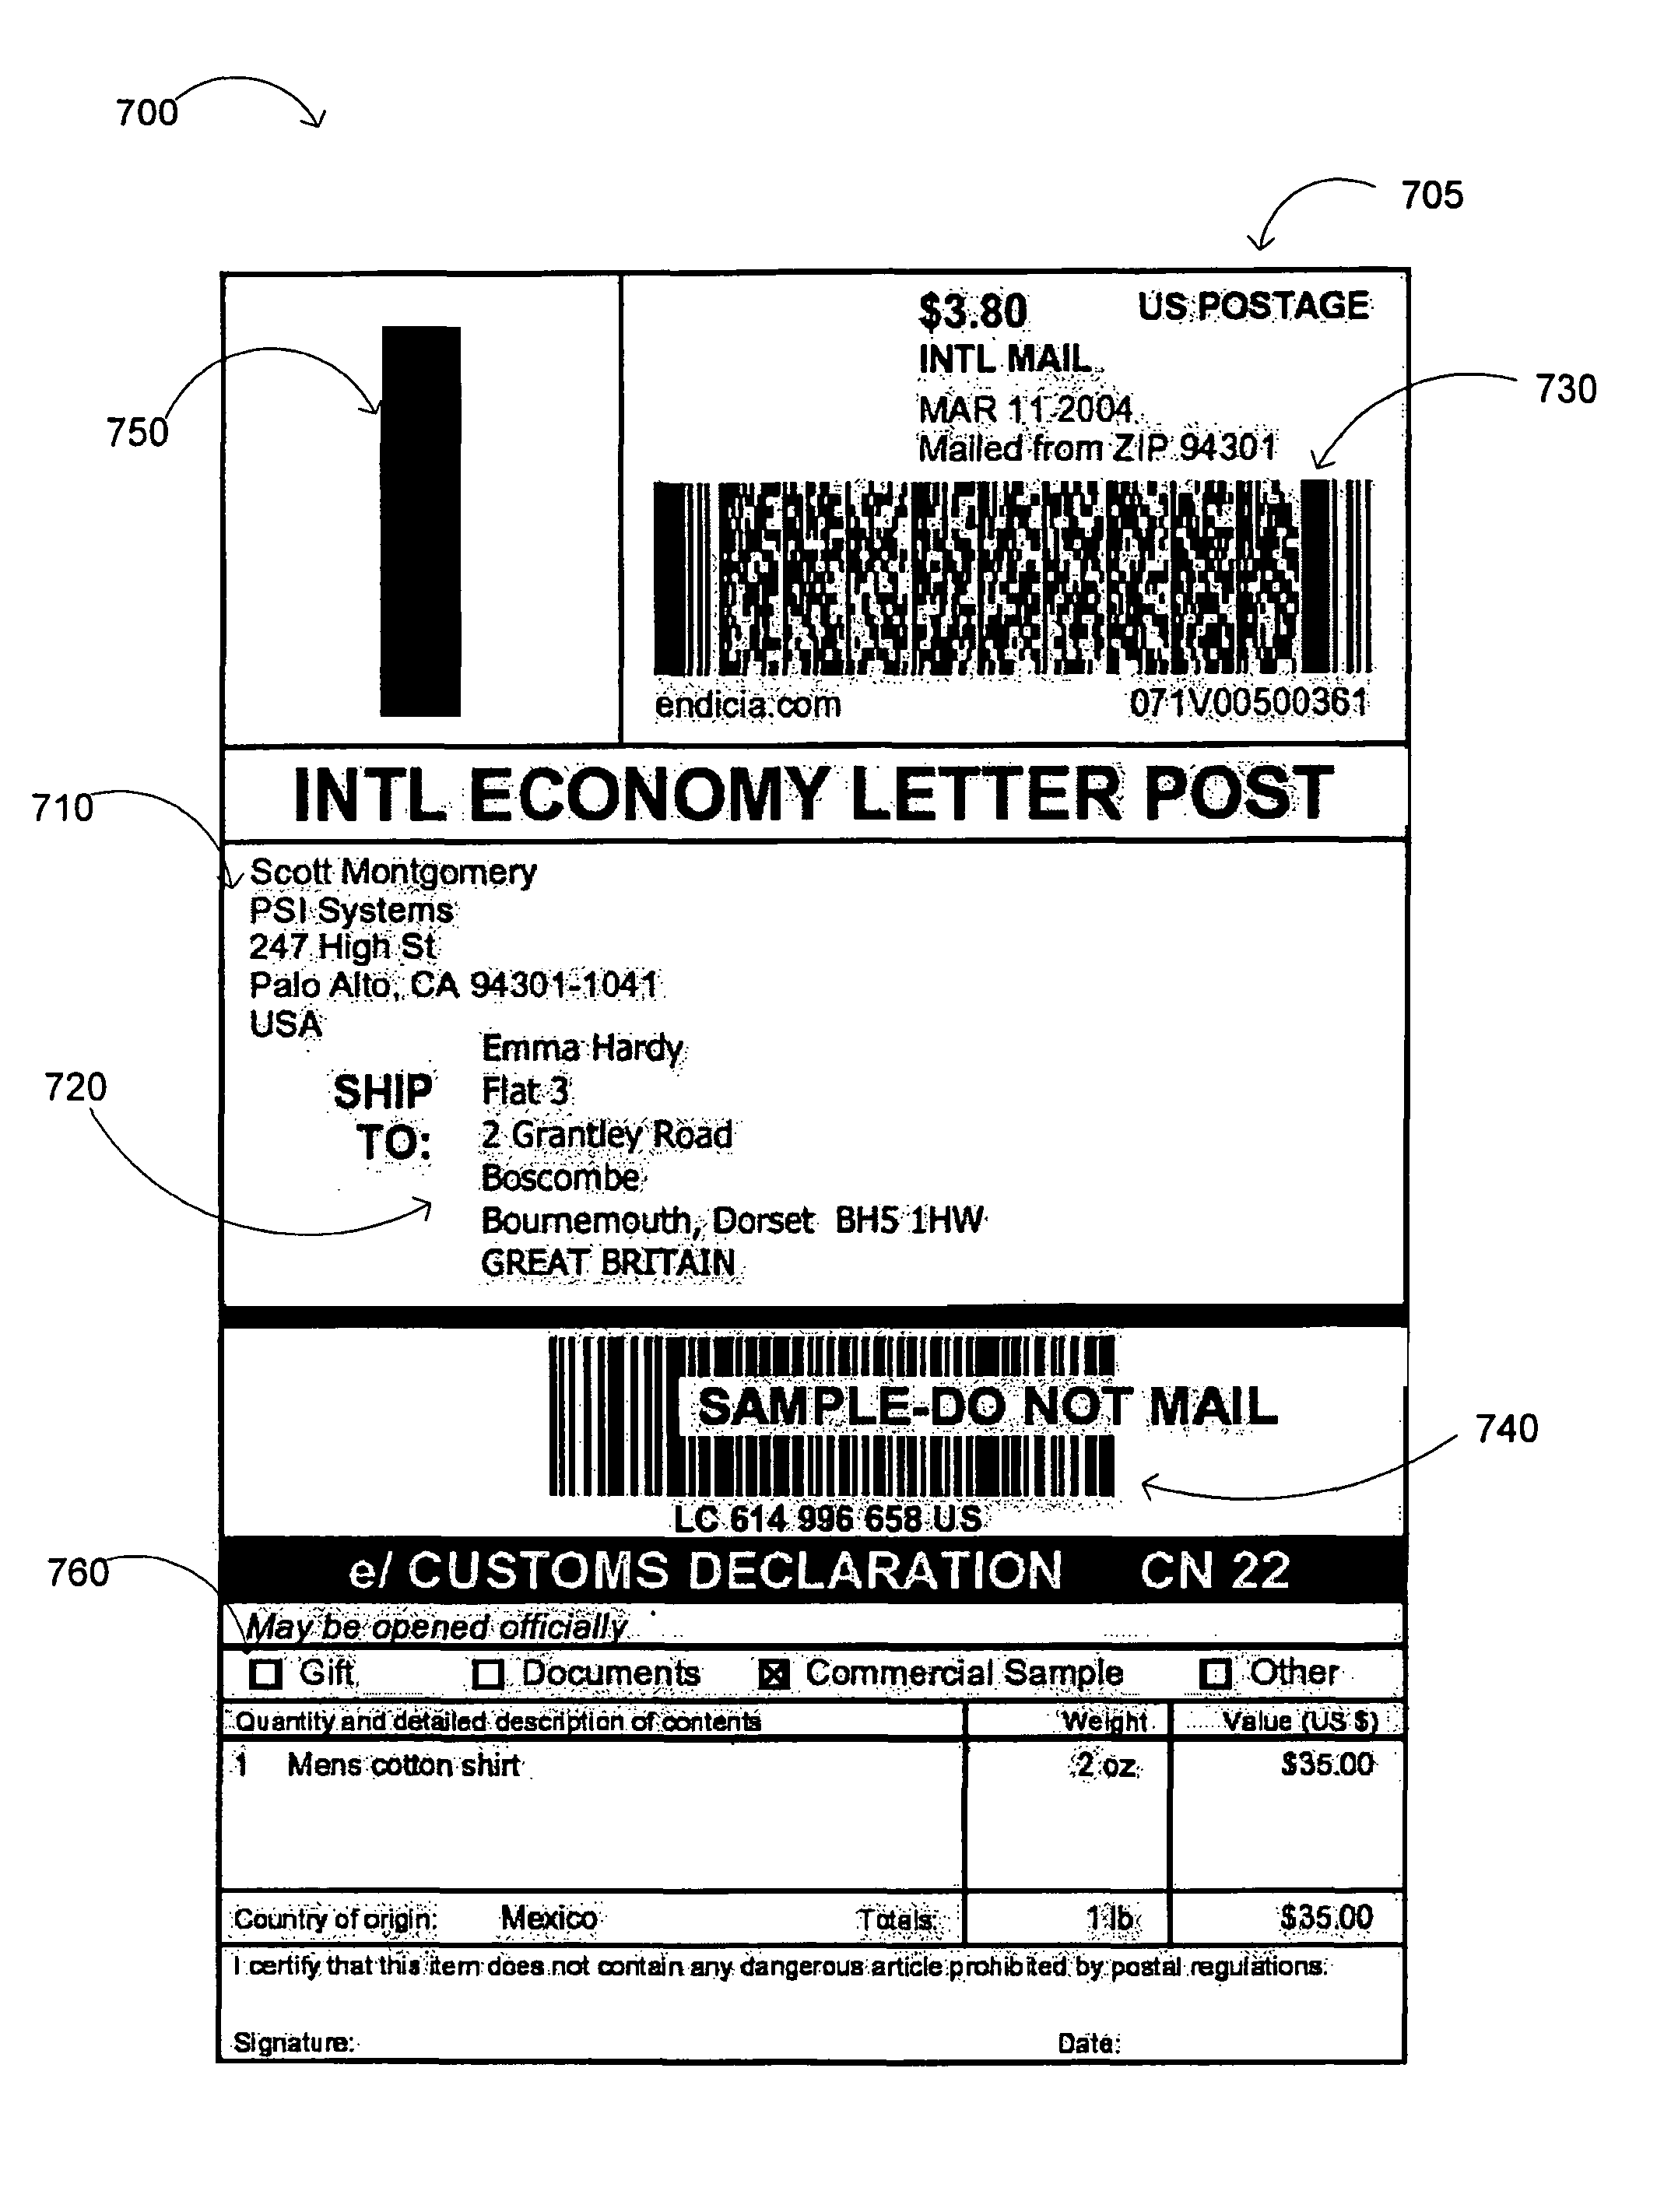 Integrated shipping label and customs form